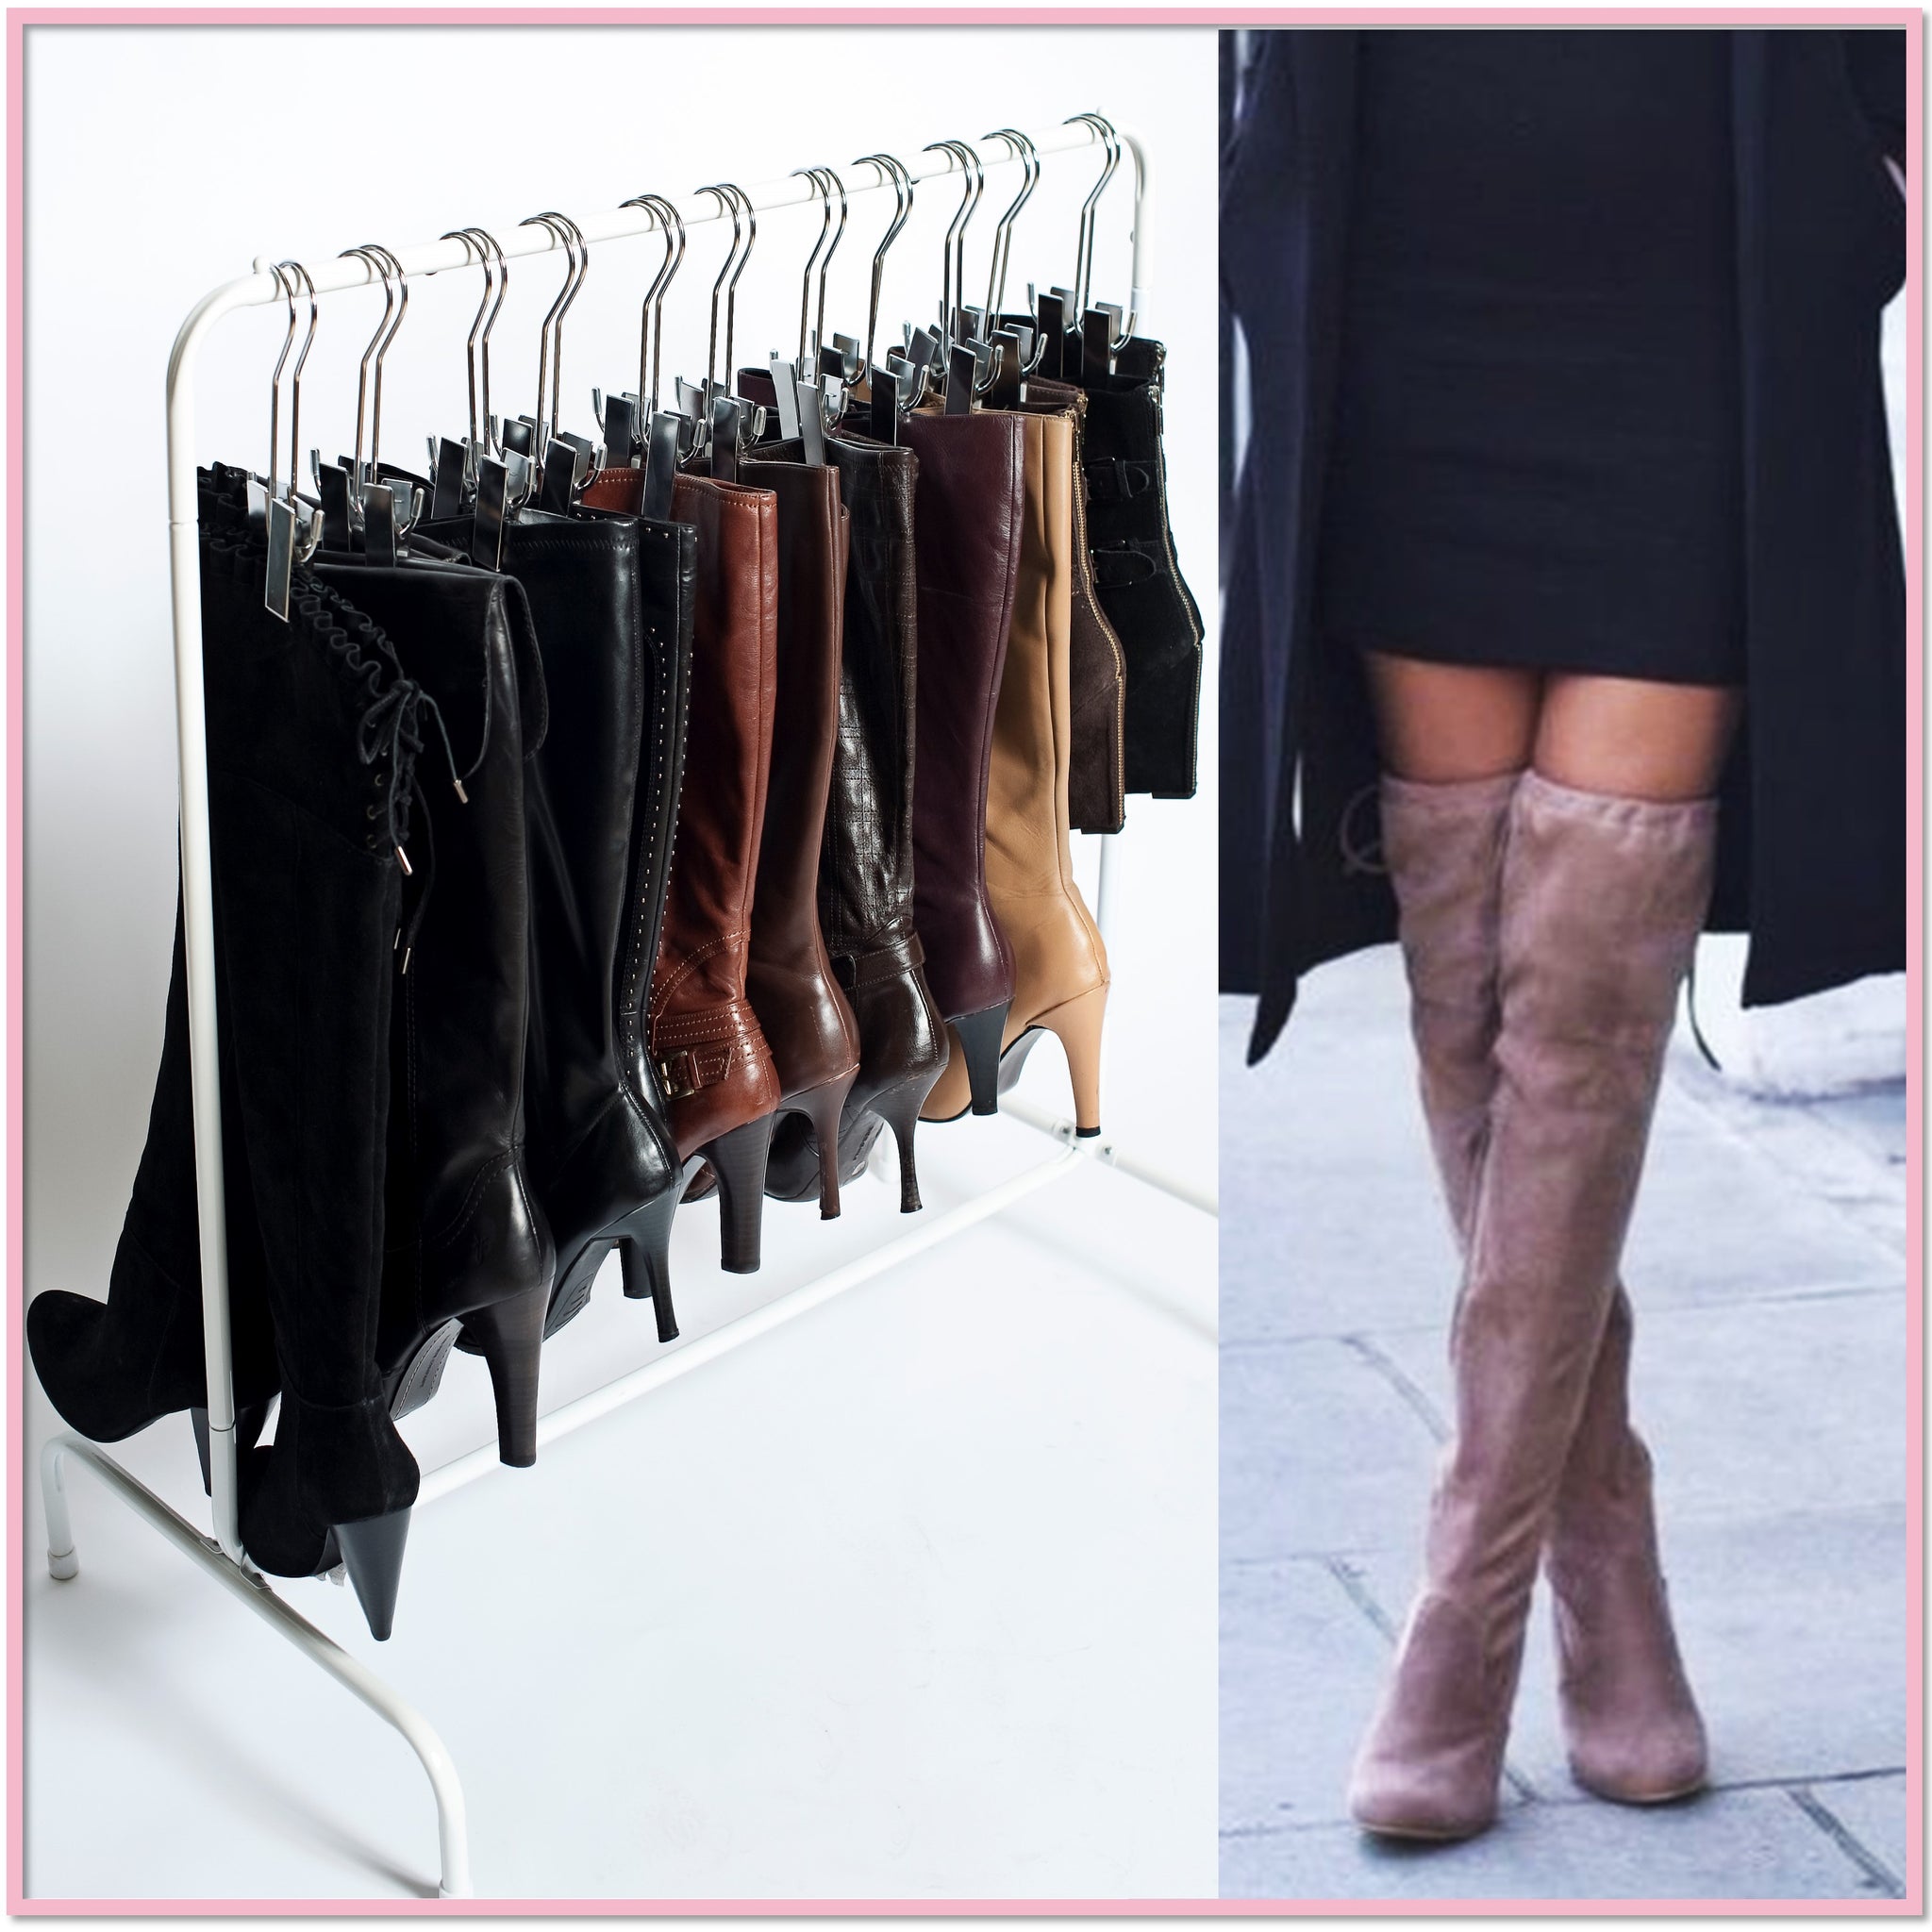 Multipurpose Boot Stands Prevent Creasing Boots Knee High Shoes